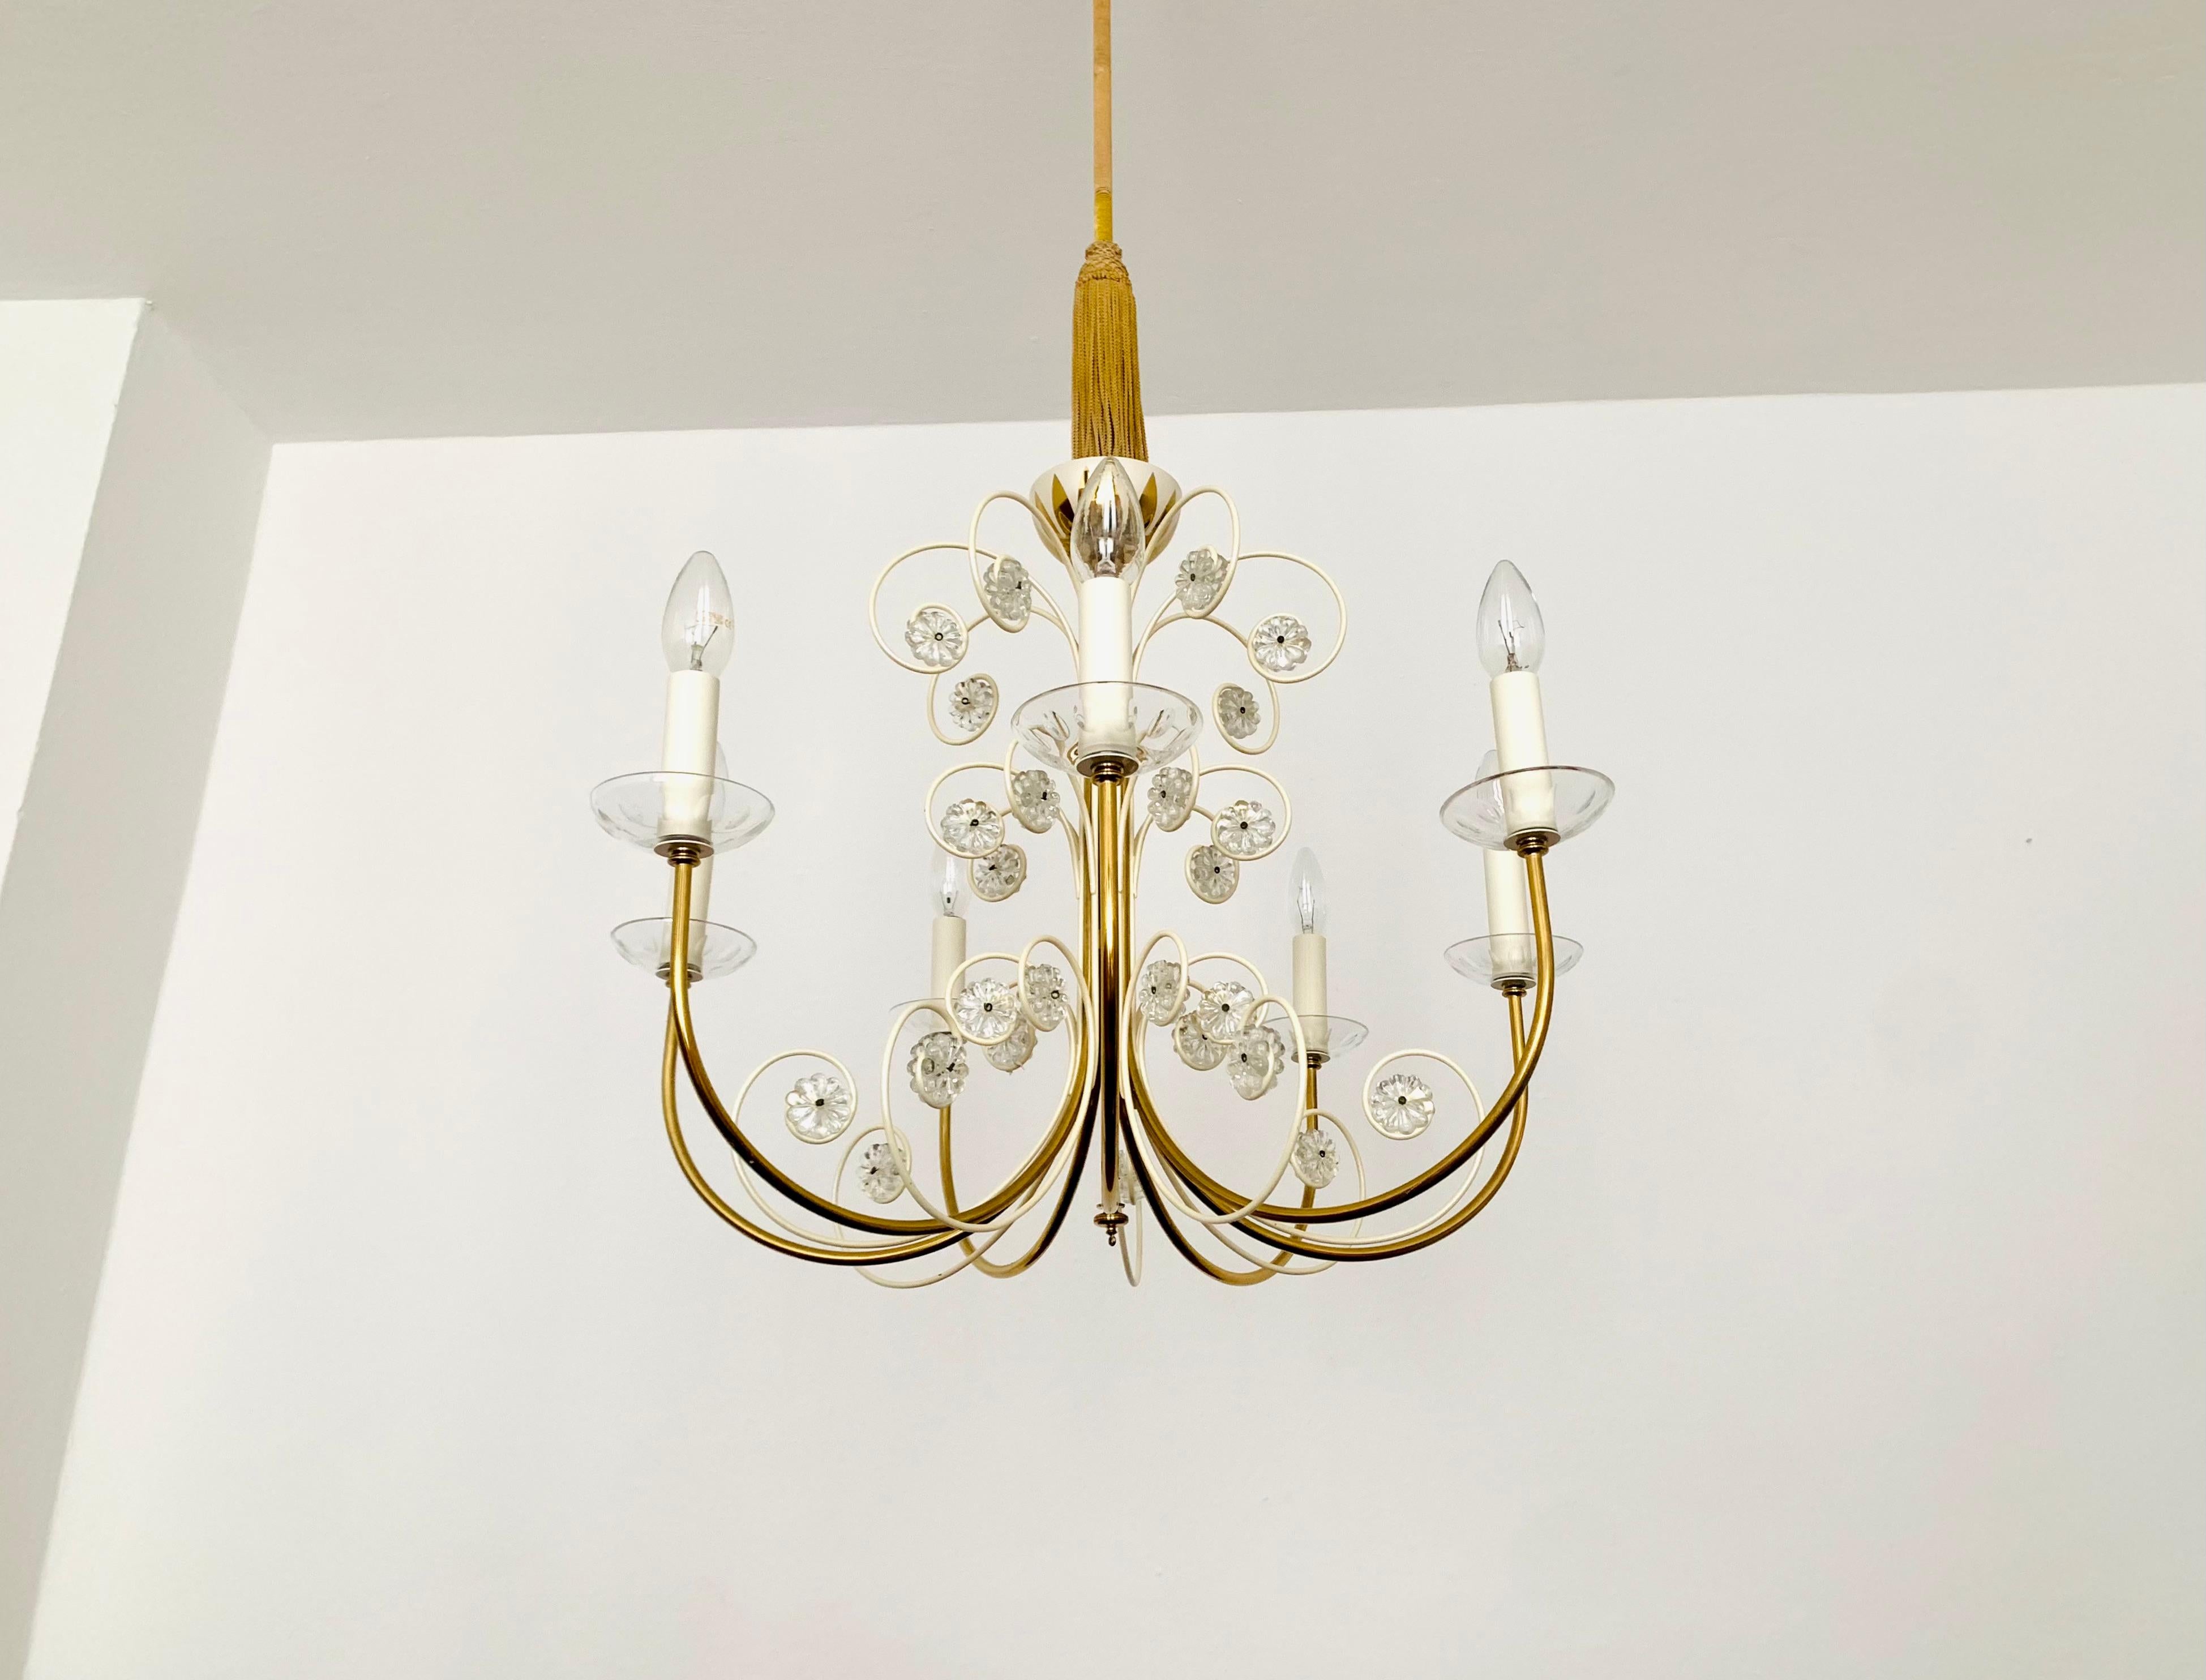 Extremely beautiful chandelier from the 1950s.
The high-quality workmanship and the very noble material impress at first sight.
Exceptionally beautiful design.
The sparkling stones spread a sensational light.

Manufacturer: Vereinigte